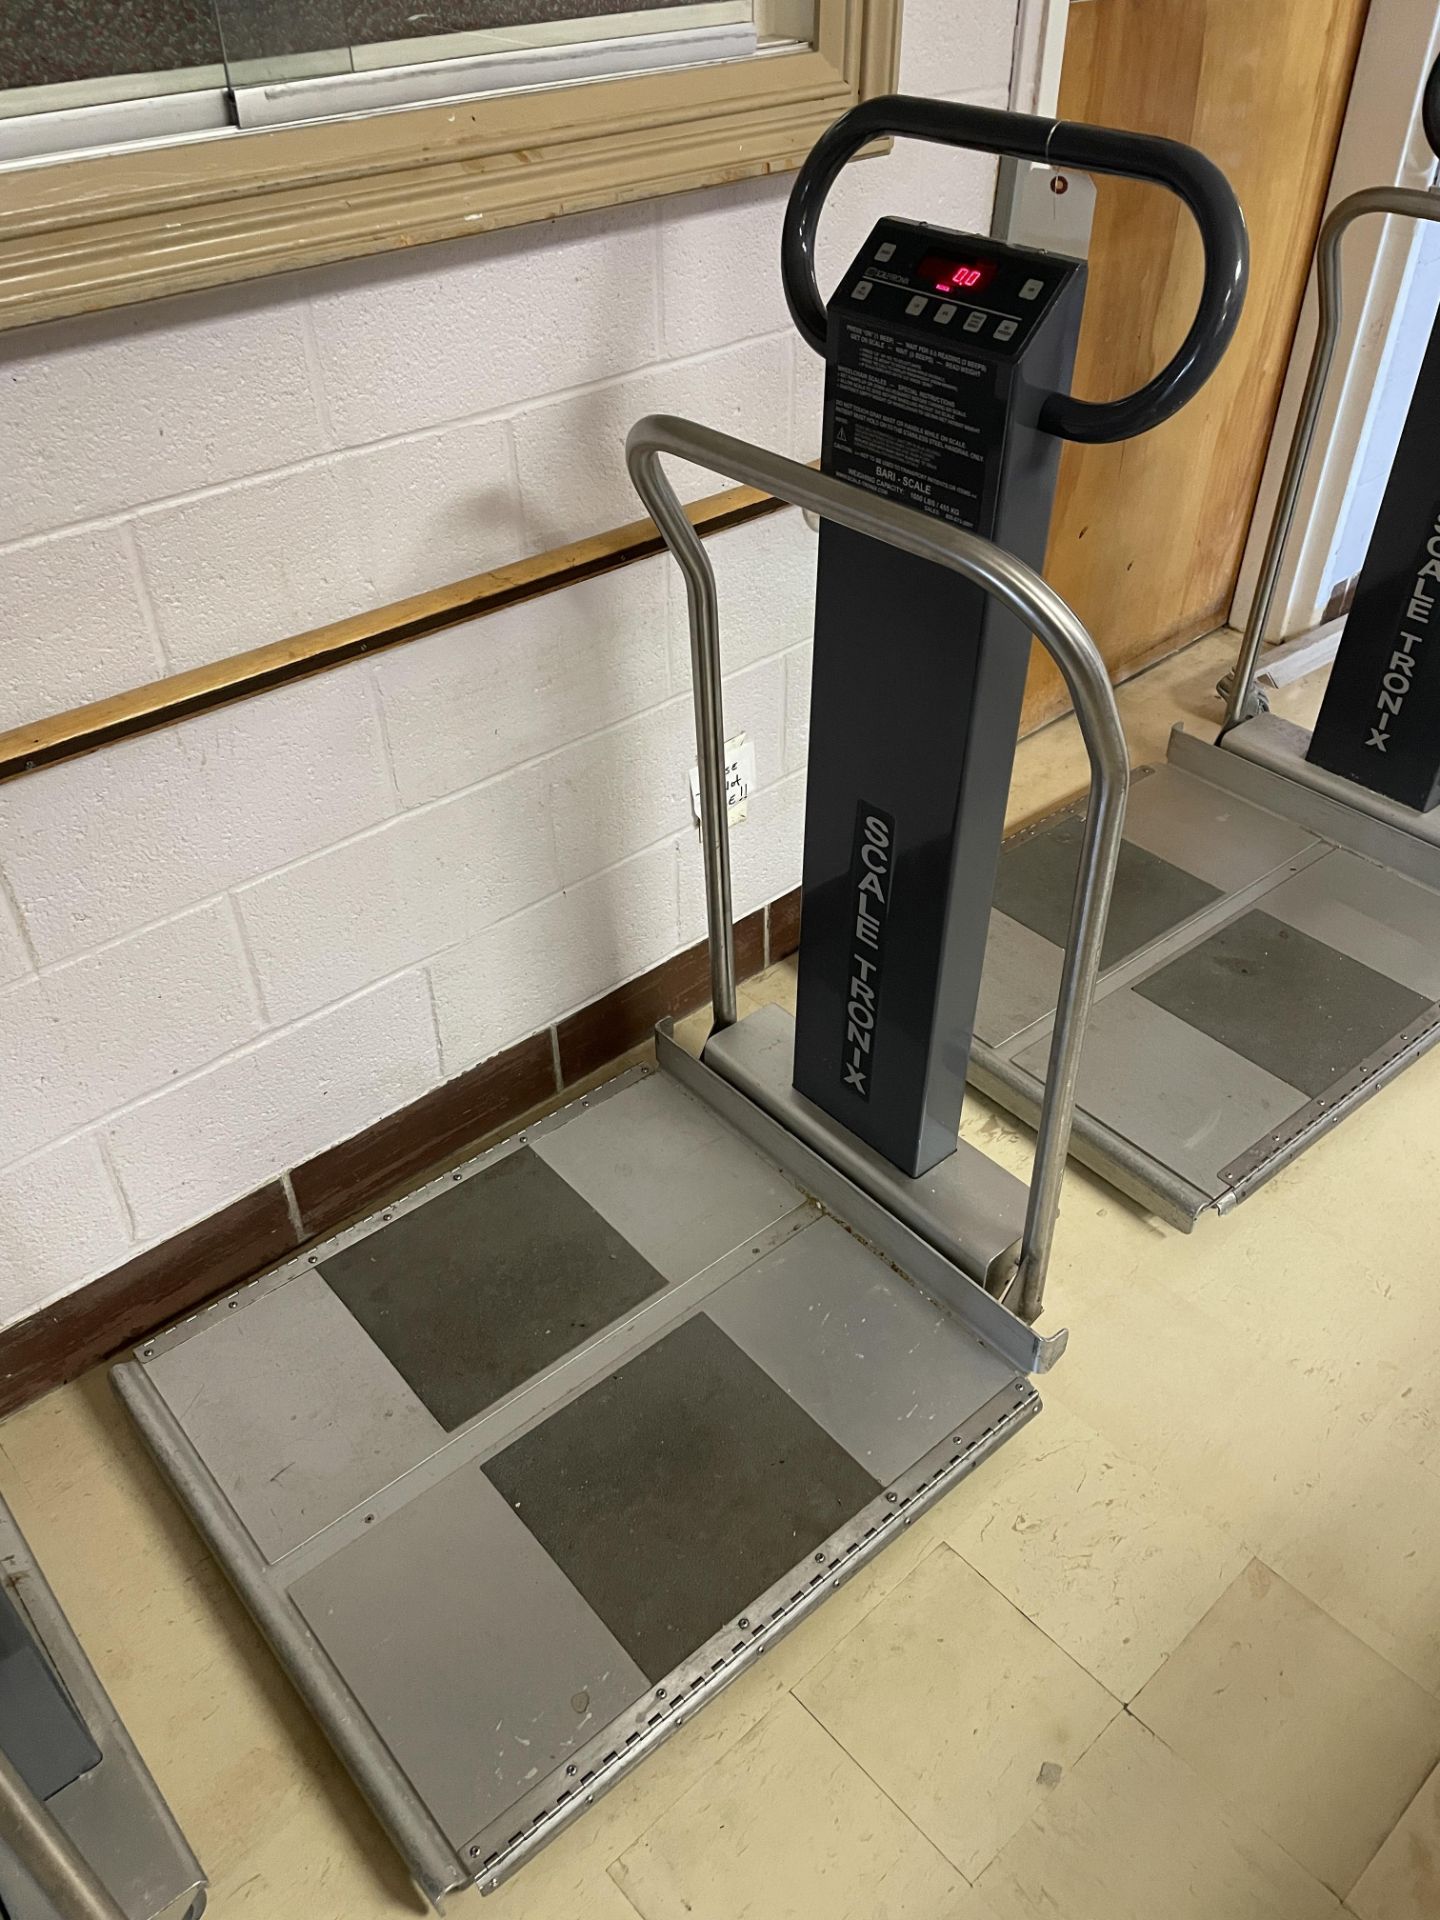 ScaleTronix 800 Lb. Capacity Digital Scale w/Wide Platform S/N: 6702-7205 & Calibration Weight - Image 2 of 4